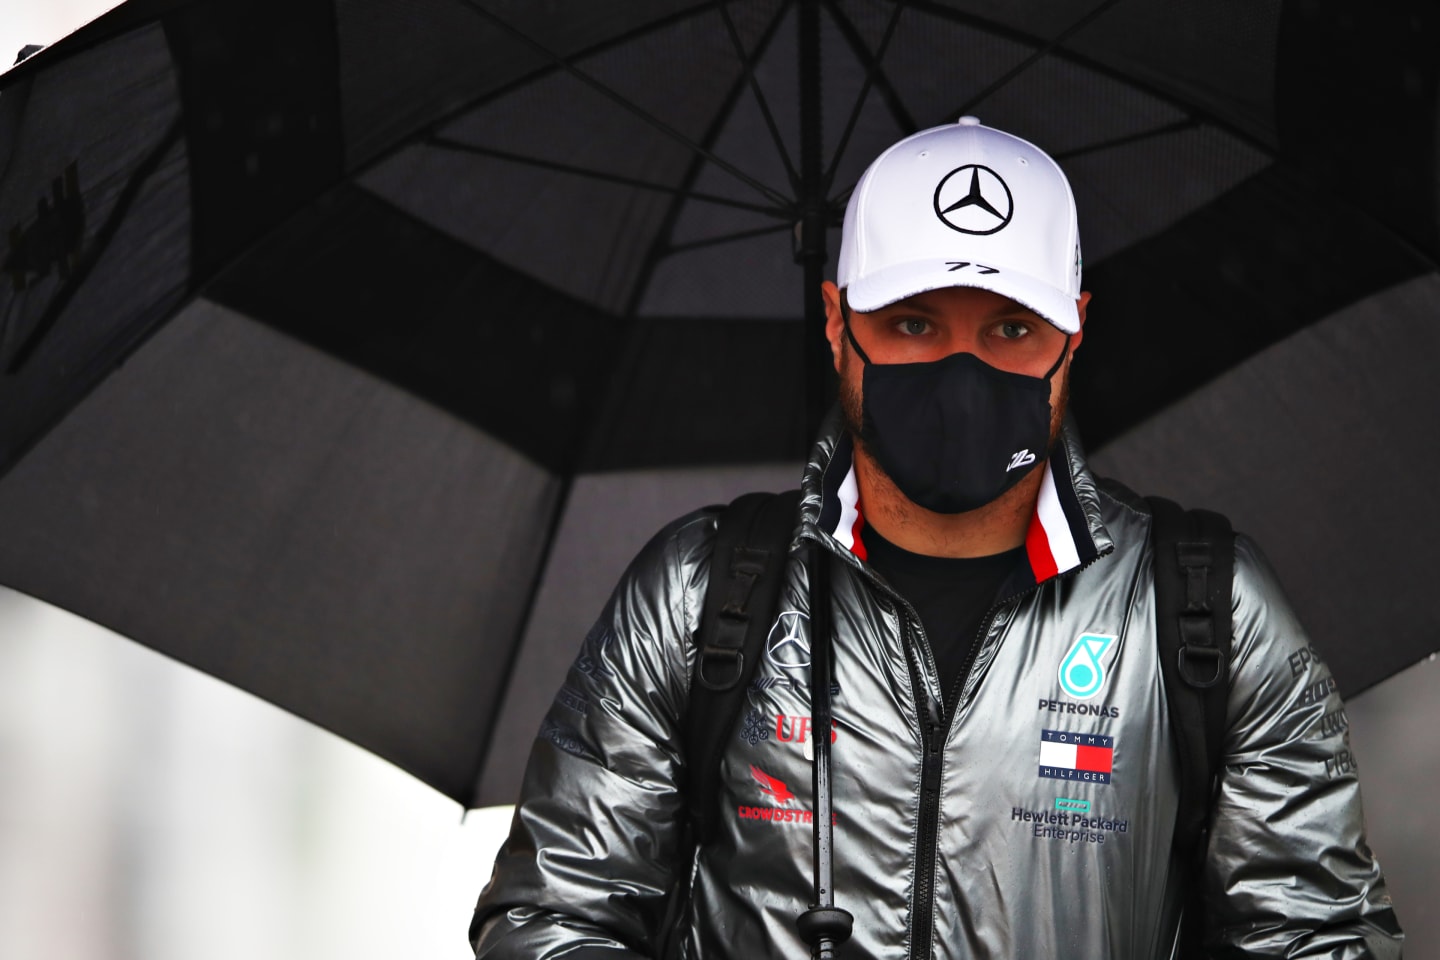 NUERBURG, GERMANY - OCTOBER 09: Valtteri Bottas of Finland and Mercedes GP walks in the Paddock during practice ahead of the F1 Eifel Grand Prix at Nuerburgring on October 09, 2020 in Nuerburg, Germany. (Photo by Mark Thompson/Getty Images)